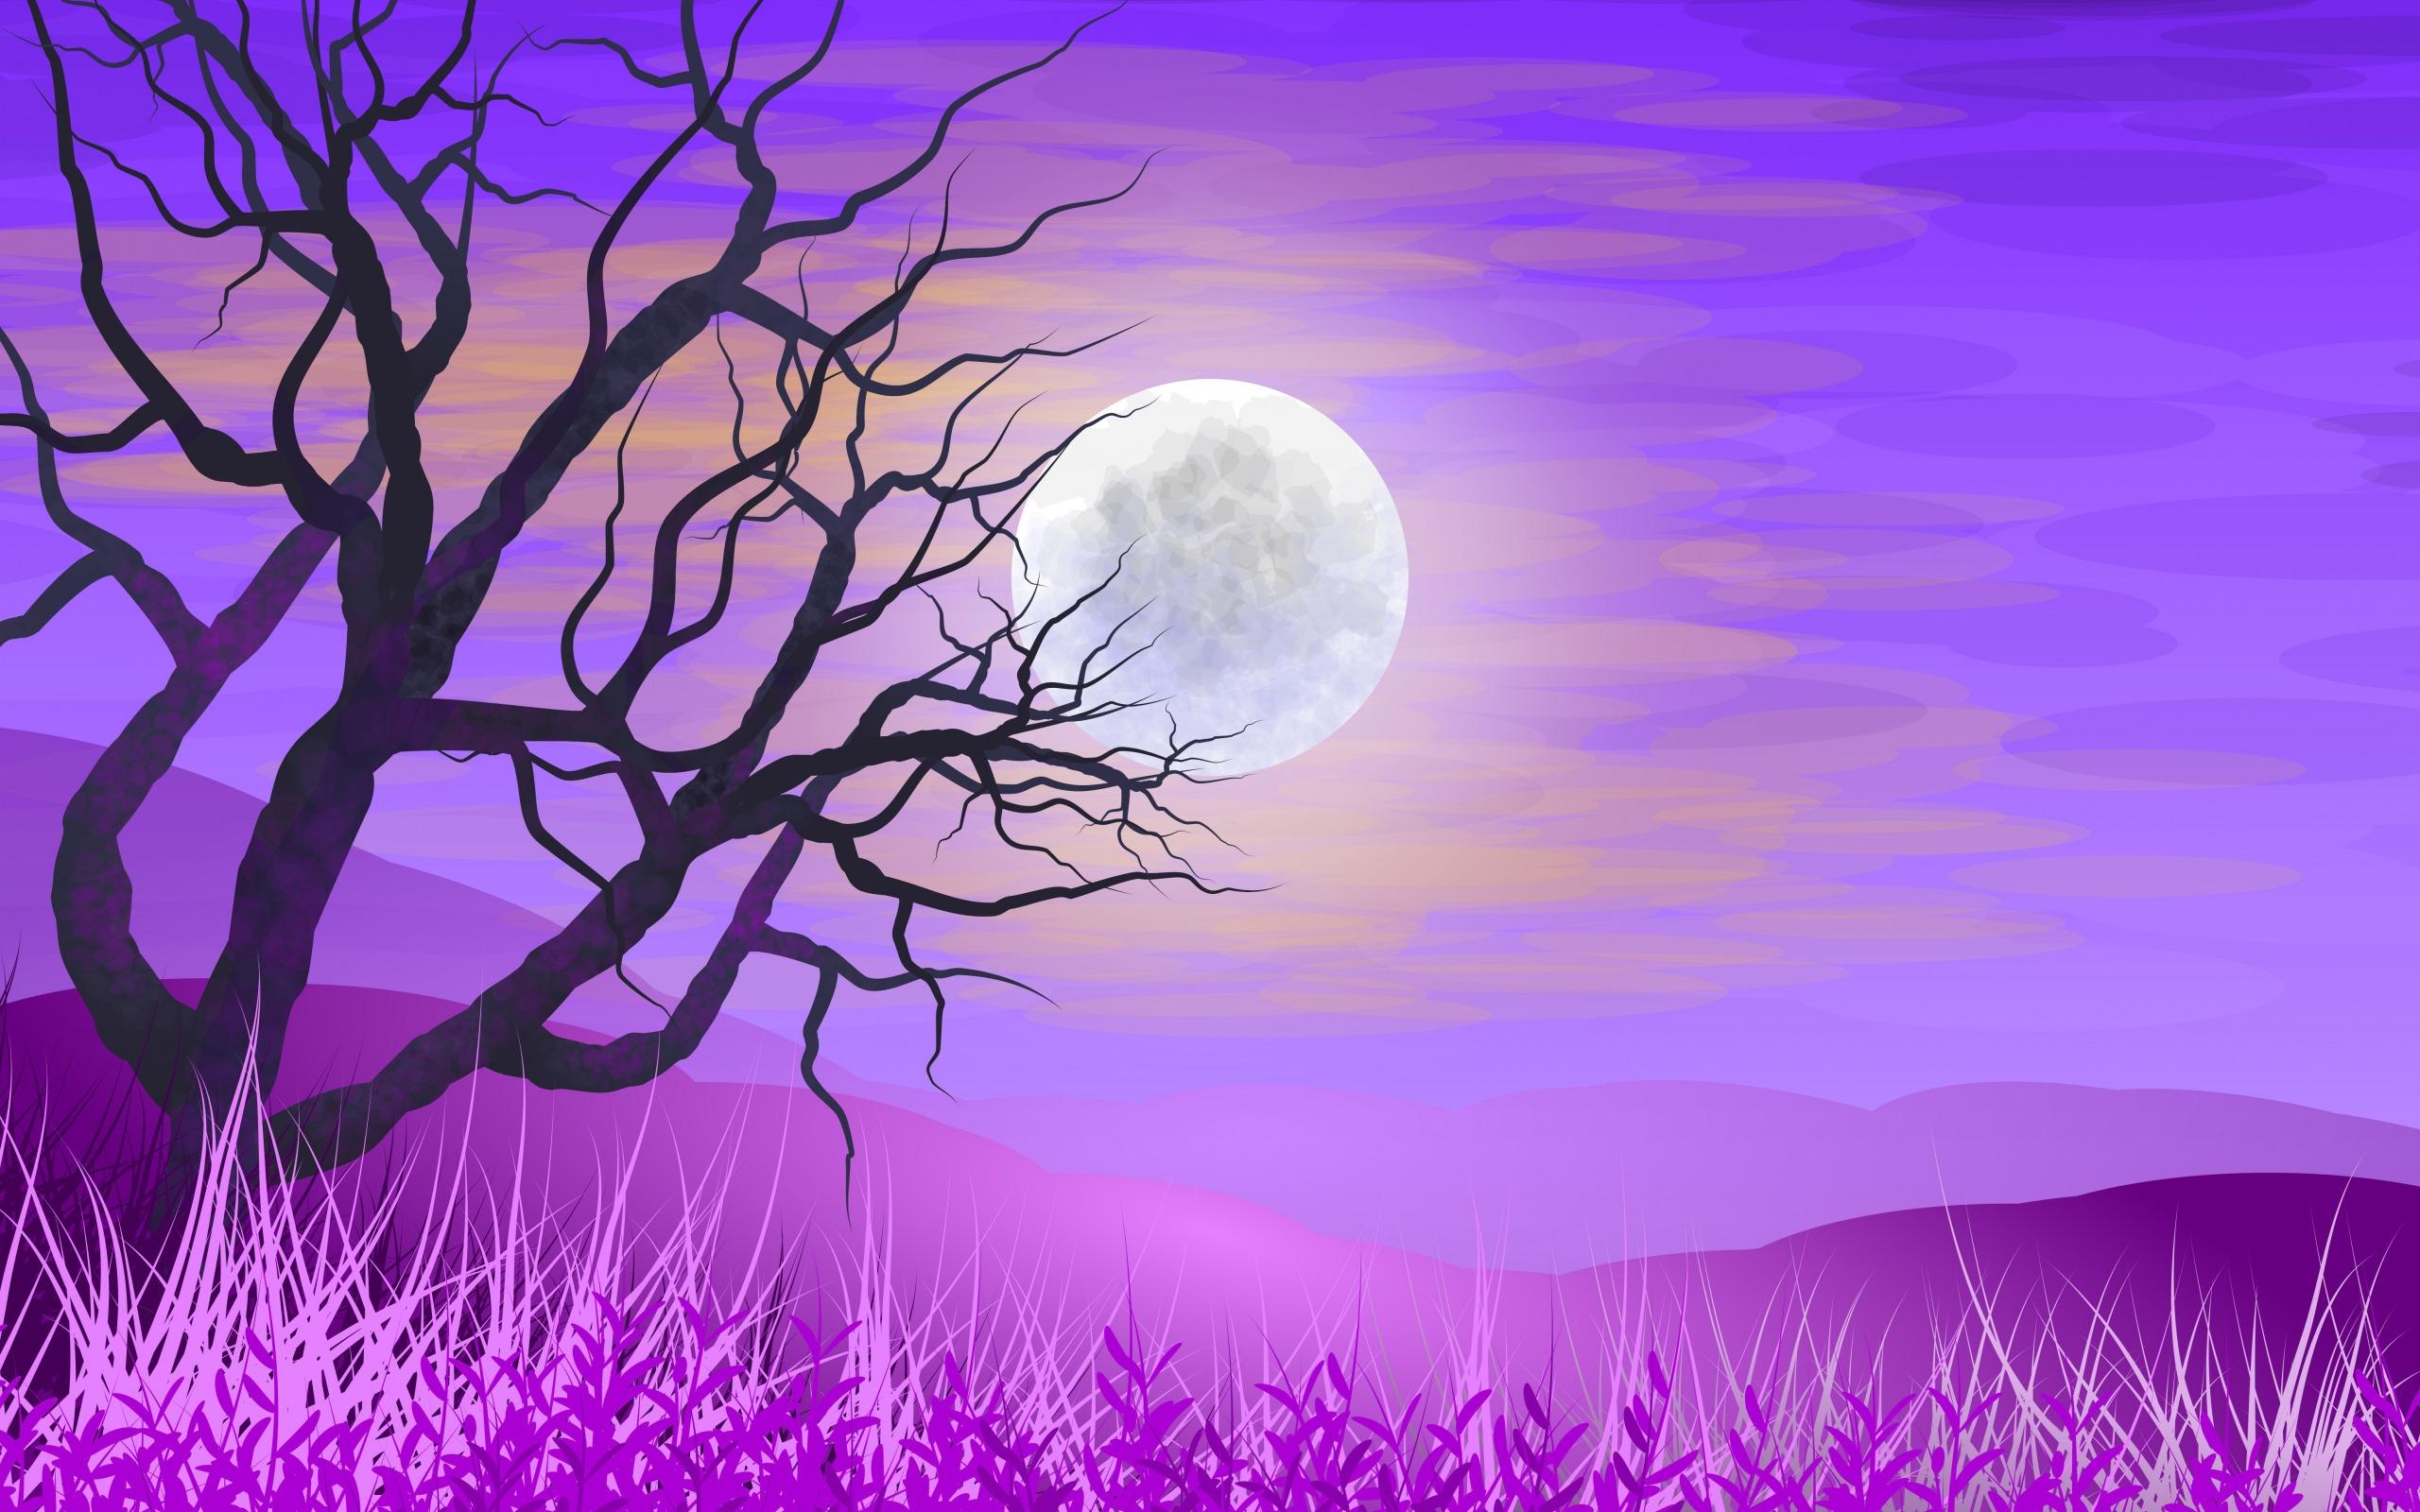 Moon Silhouette Wallpapers - Top Free Moon Silhouette Backgrounds ...